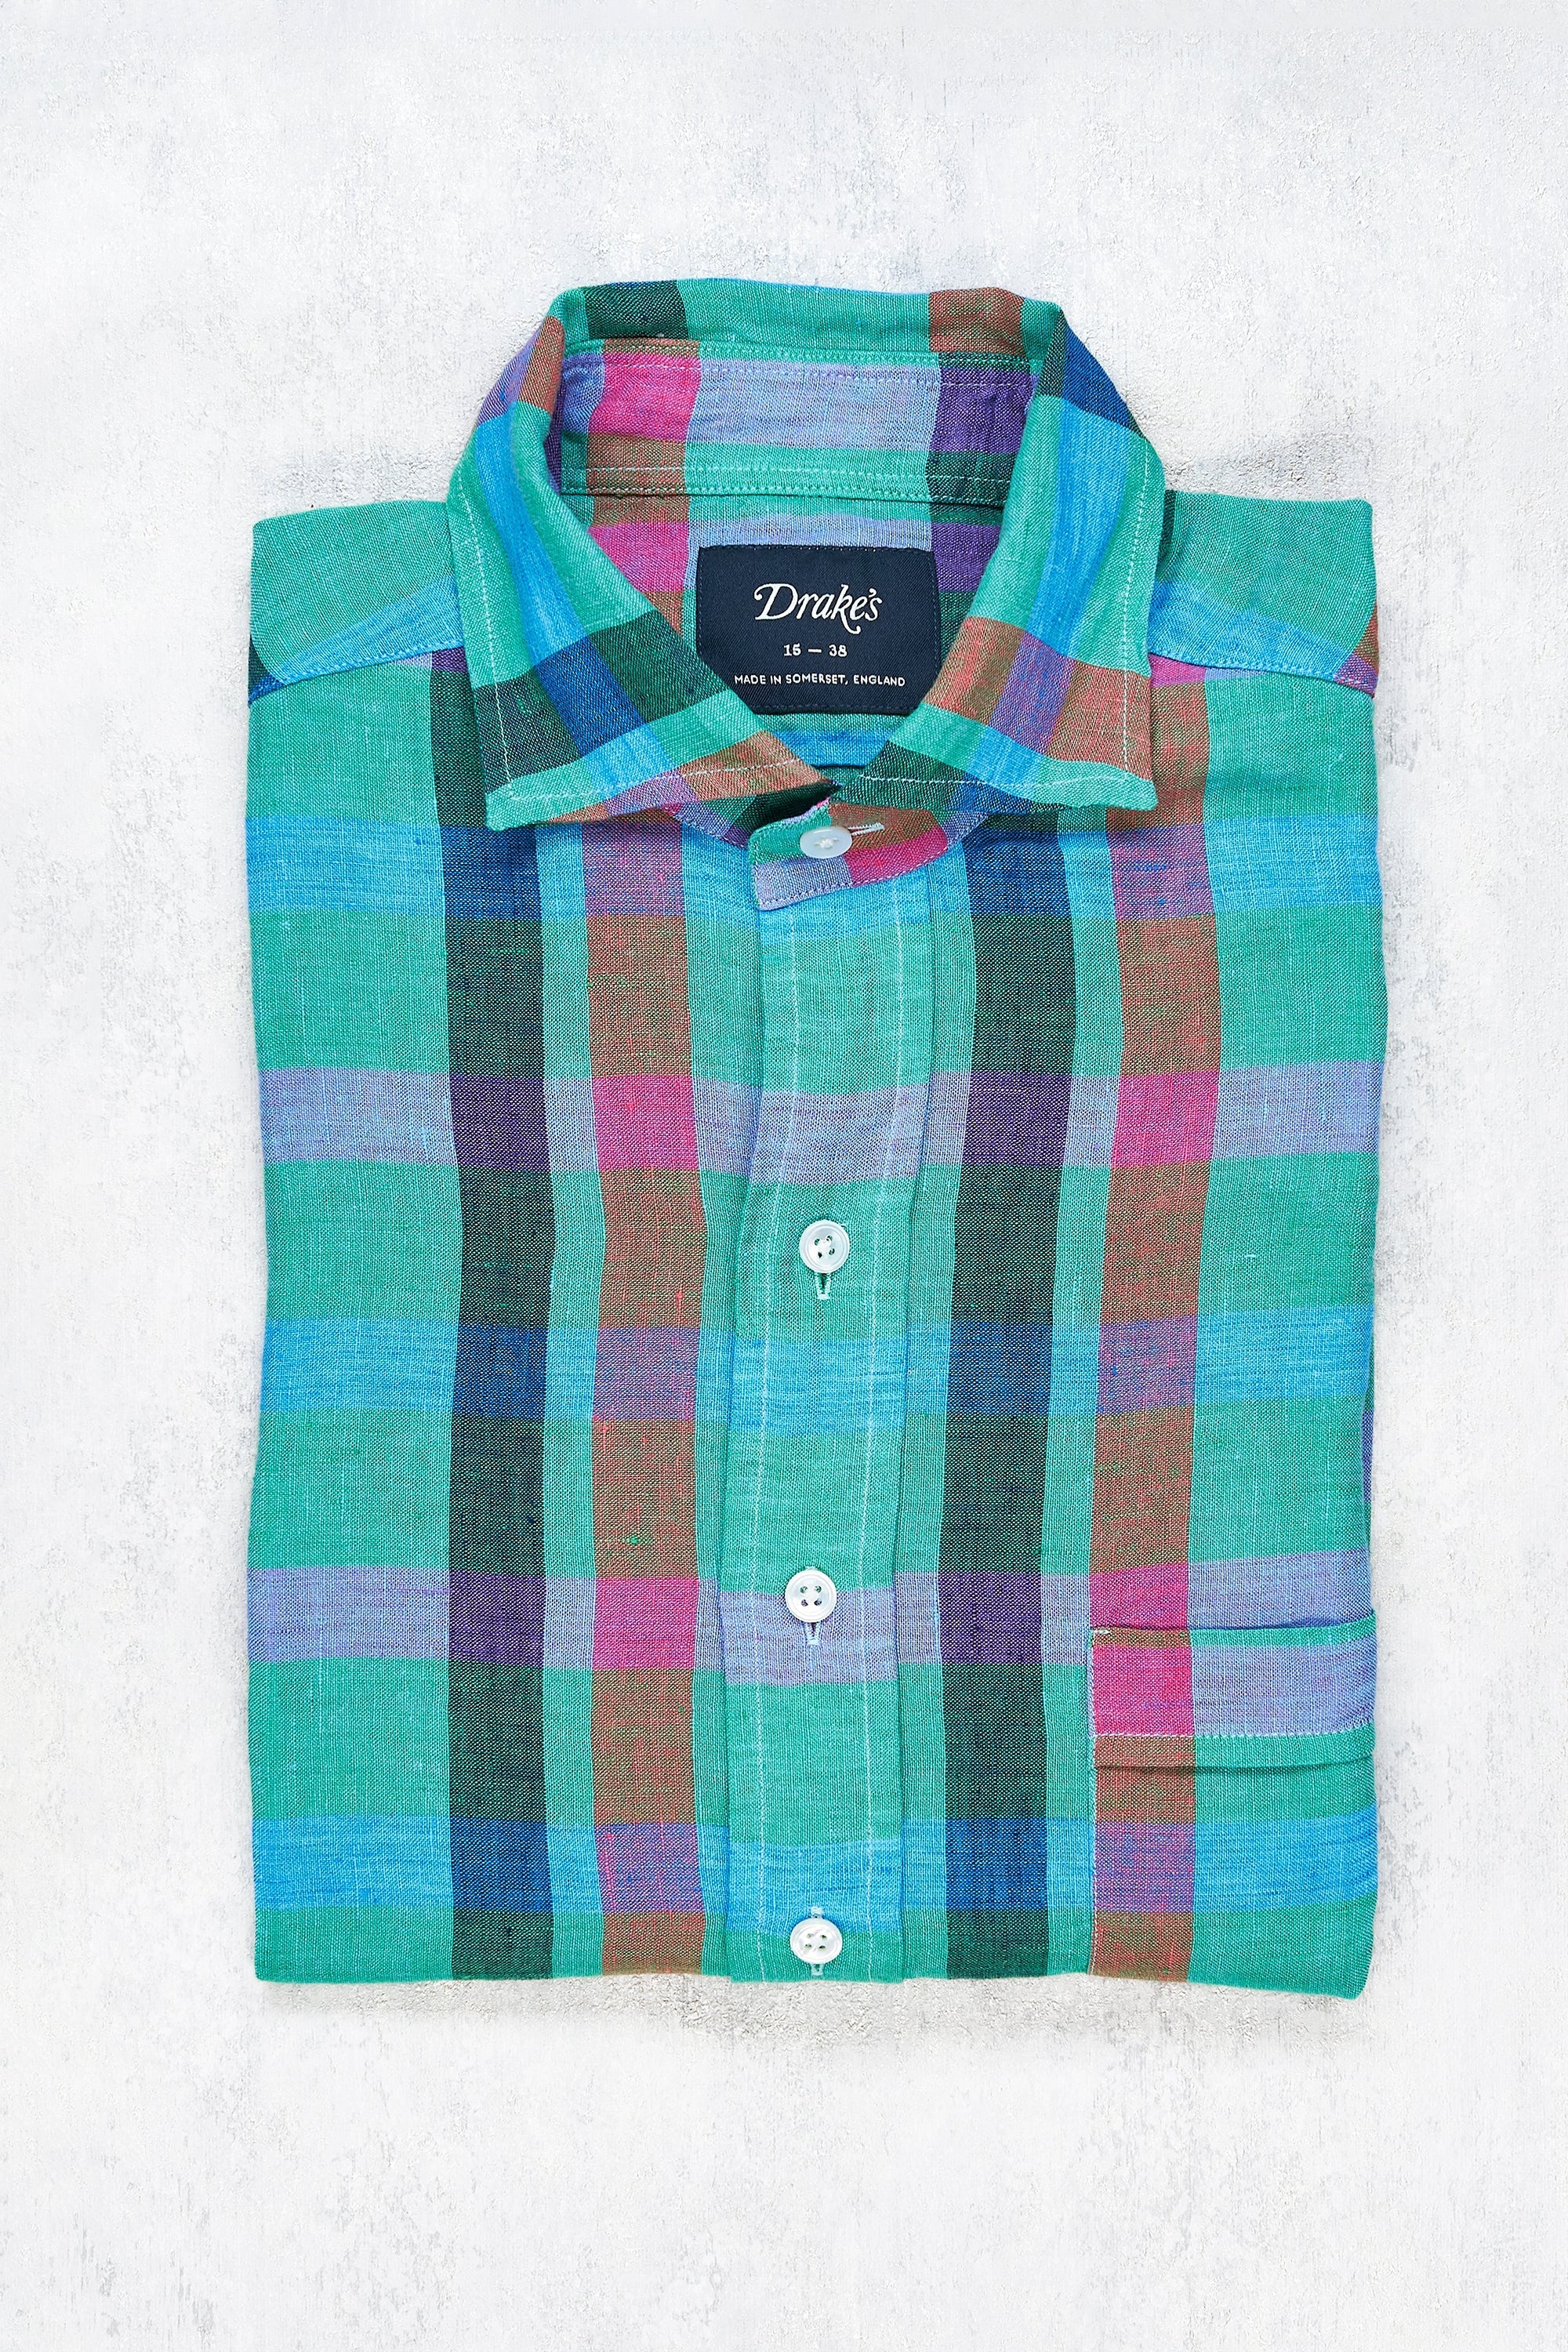 Drake's Green with Blue/Pink/Purple Check Linen Shirt